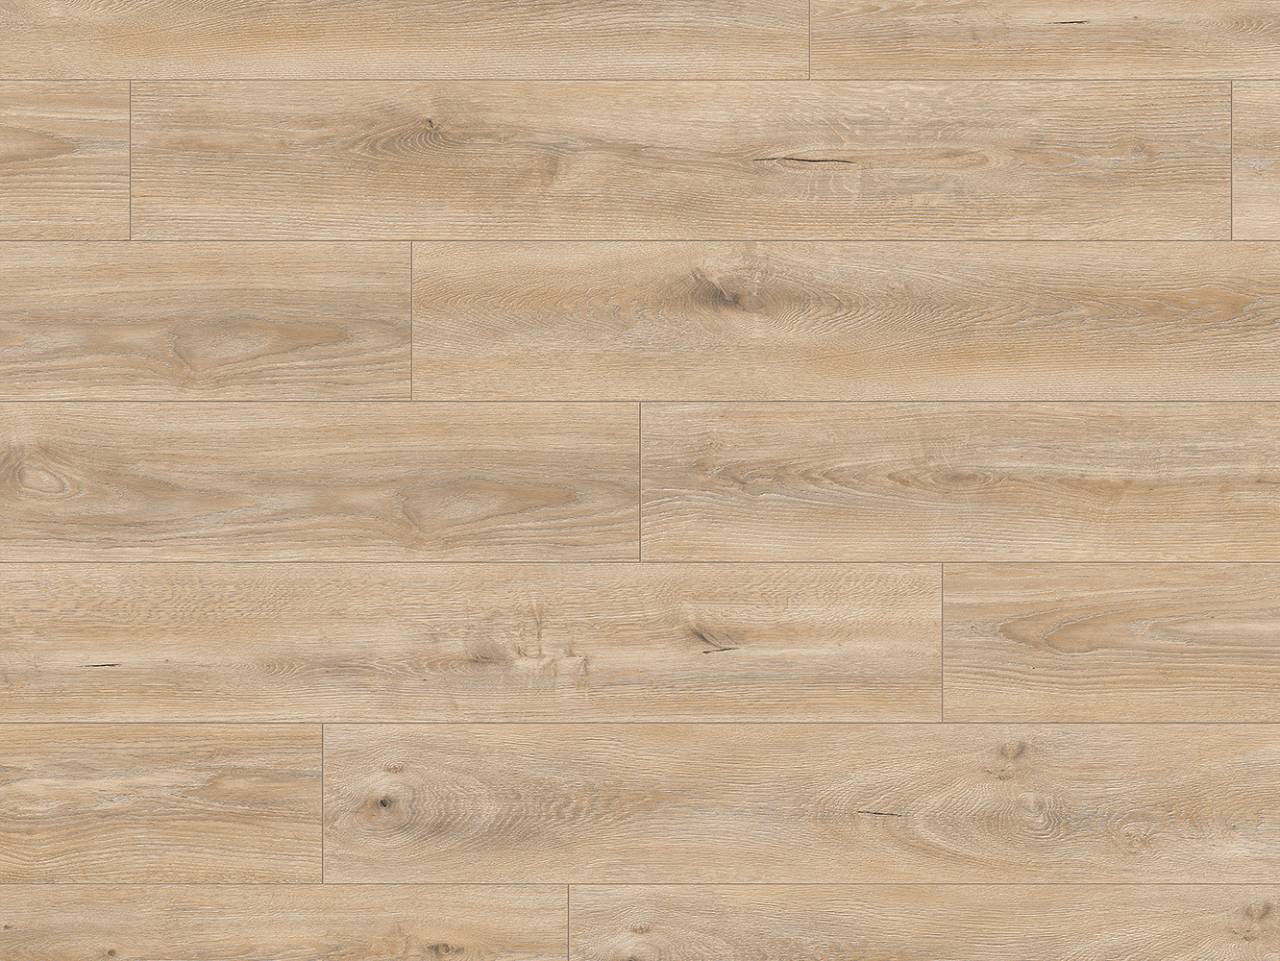 Close-up view of product K469 Tortilla Cashmere Oak, showcasing its refined oak grain texture and the warm, inviting tones of its cashmere tortilla finish.